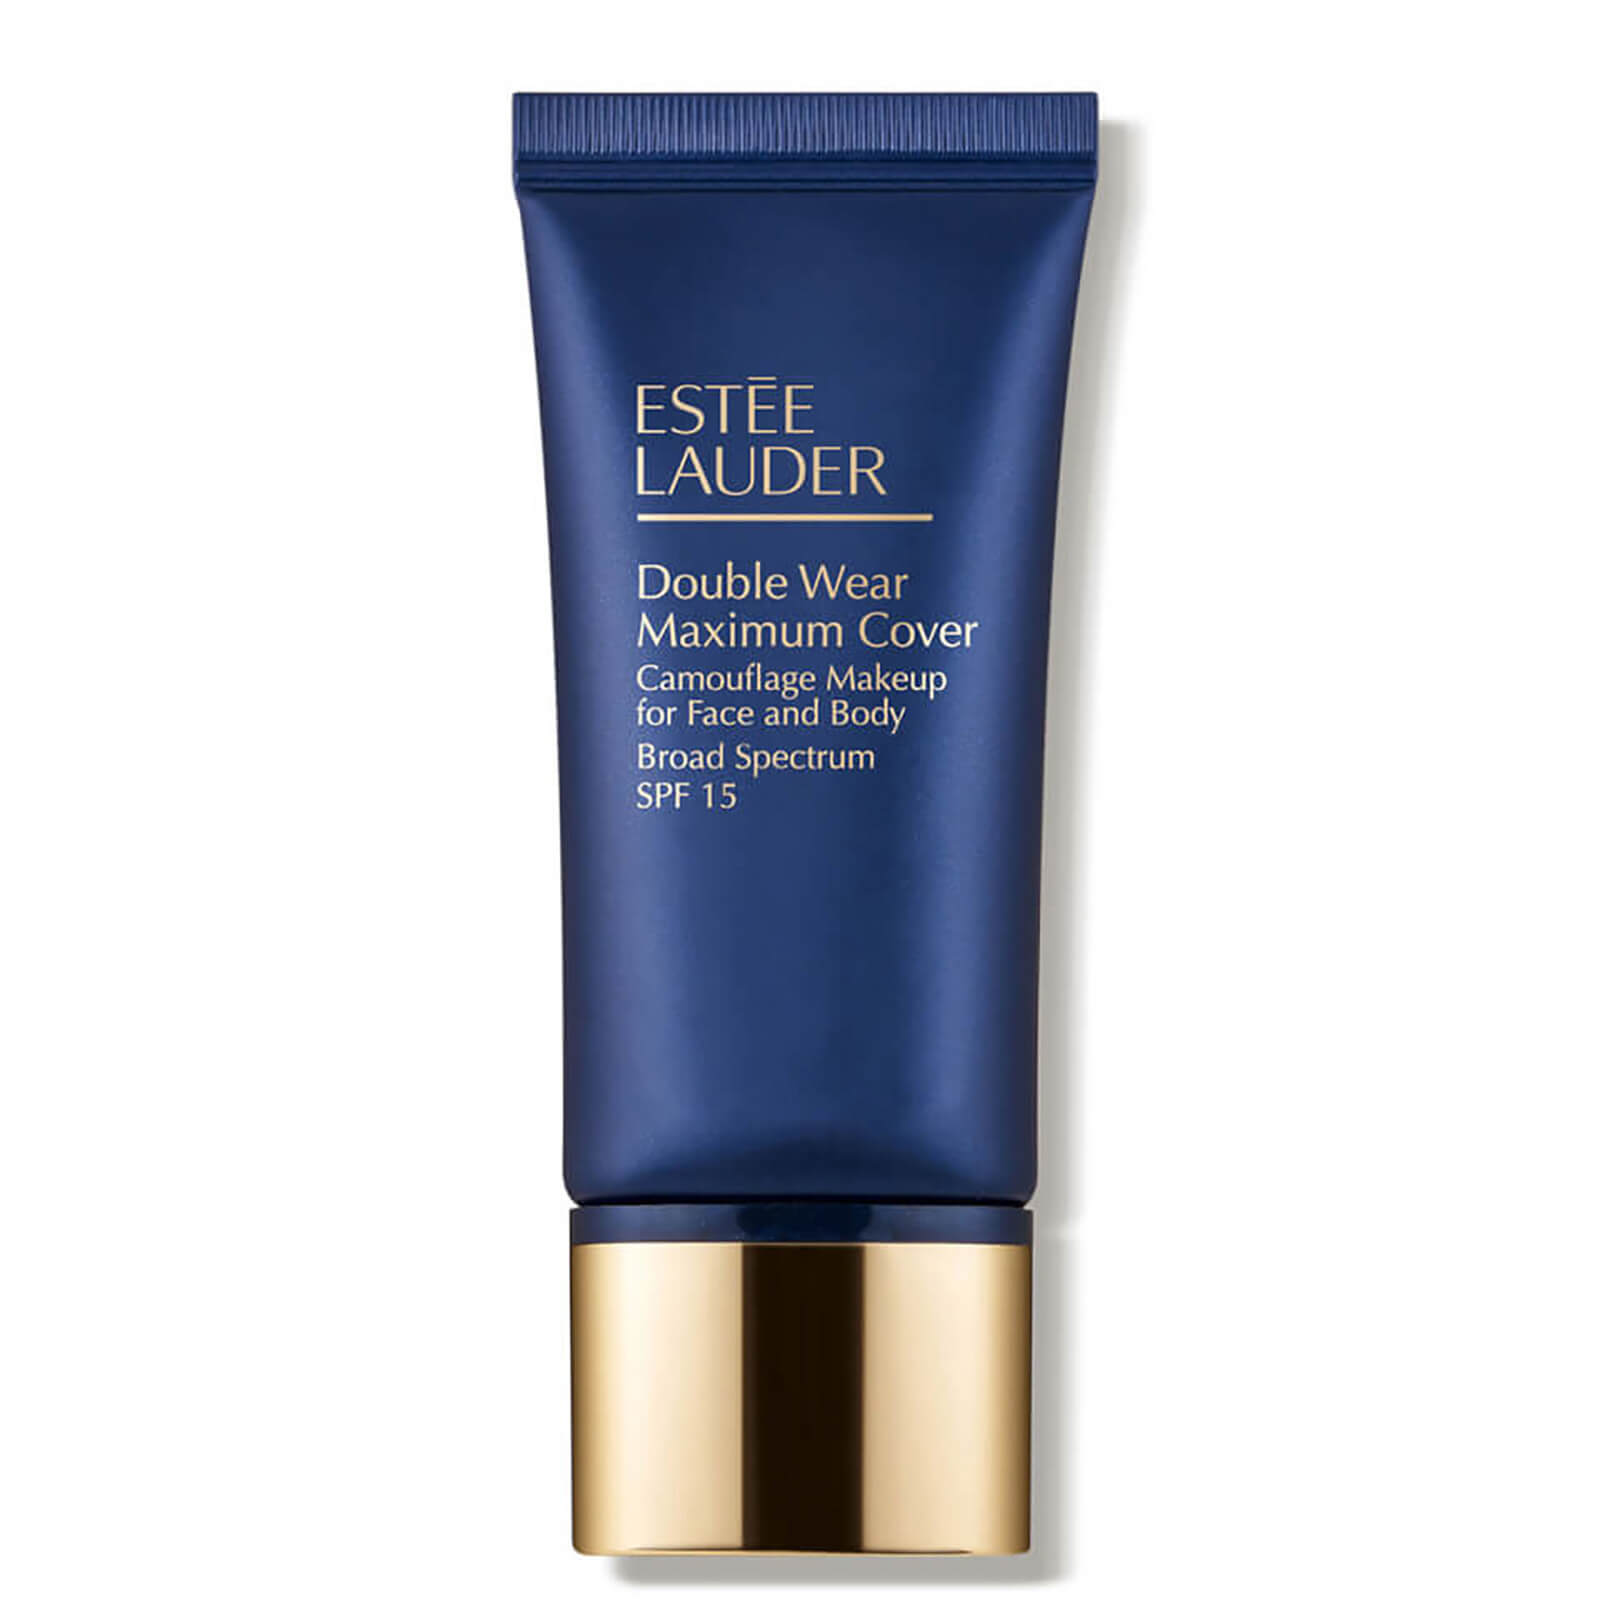 Estee Lauder Double Wear Maximum Cover Camouflage makeup for face & body SPF 15-Brown Brown